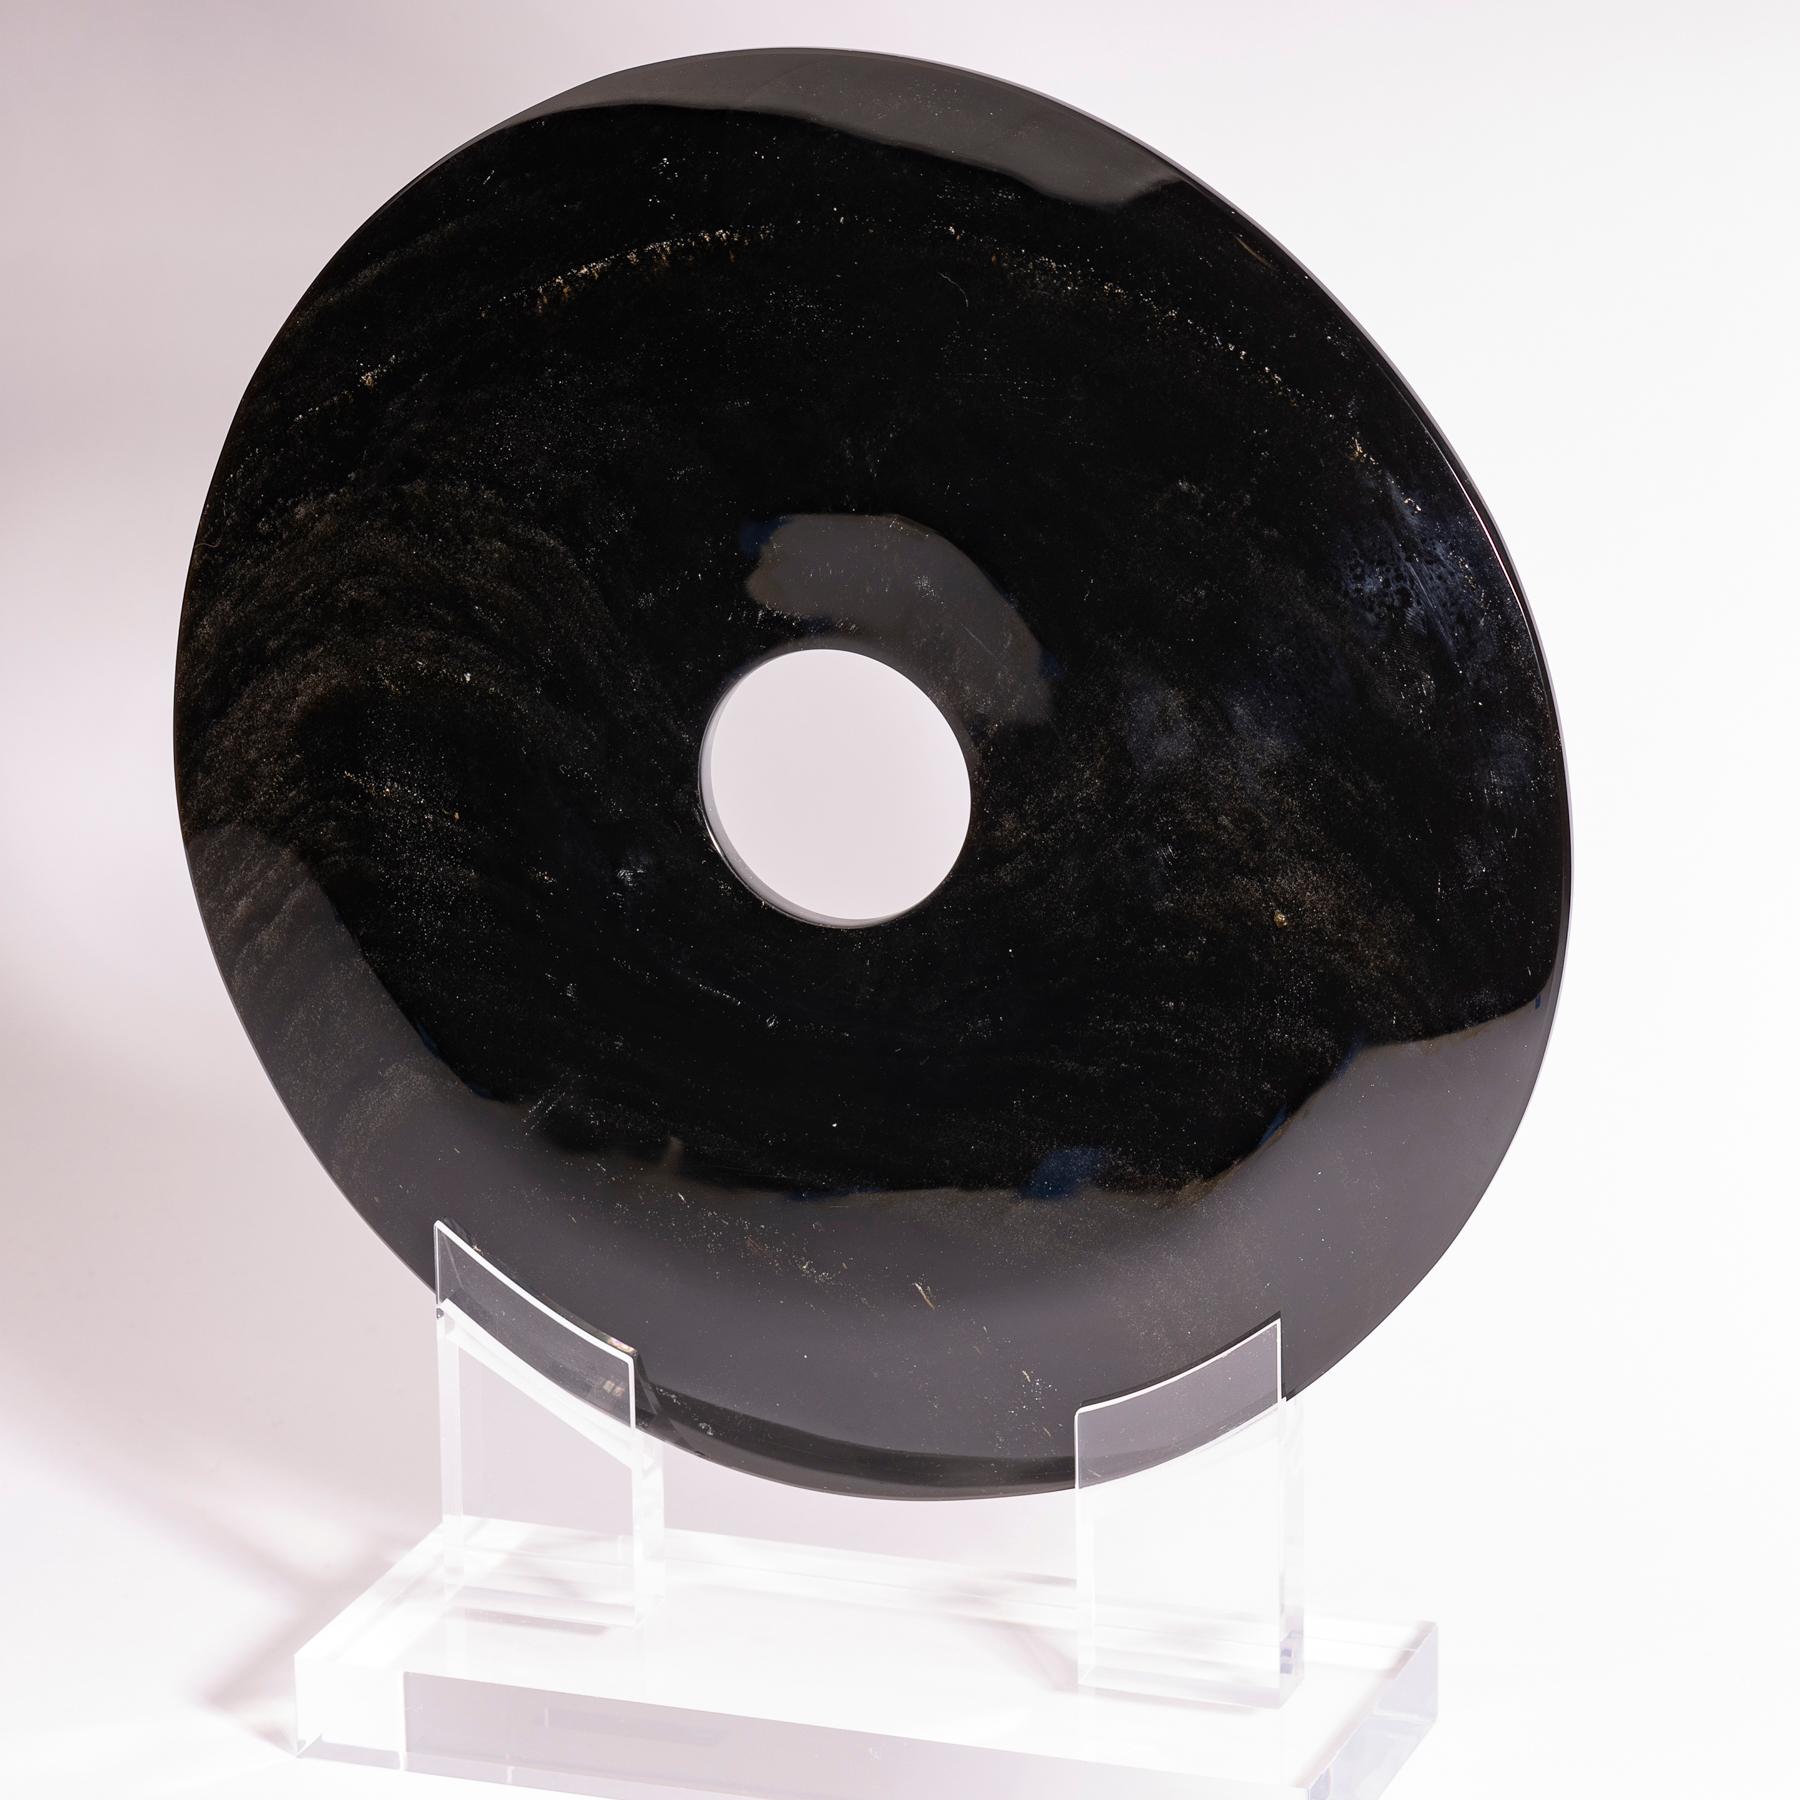 Contemporary Mexican Obsidian with Gold Shine Disk Sculpture on Custom Acrylic Base